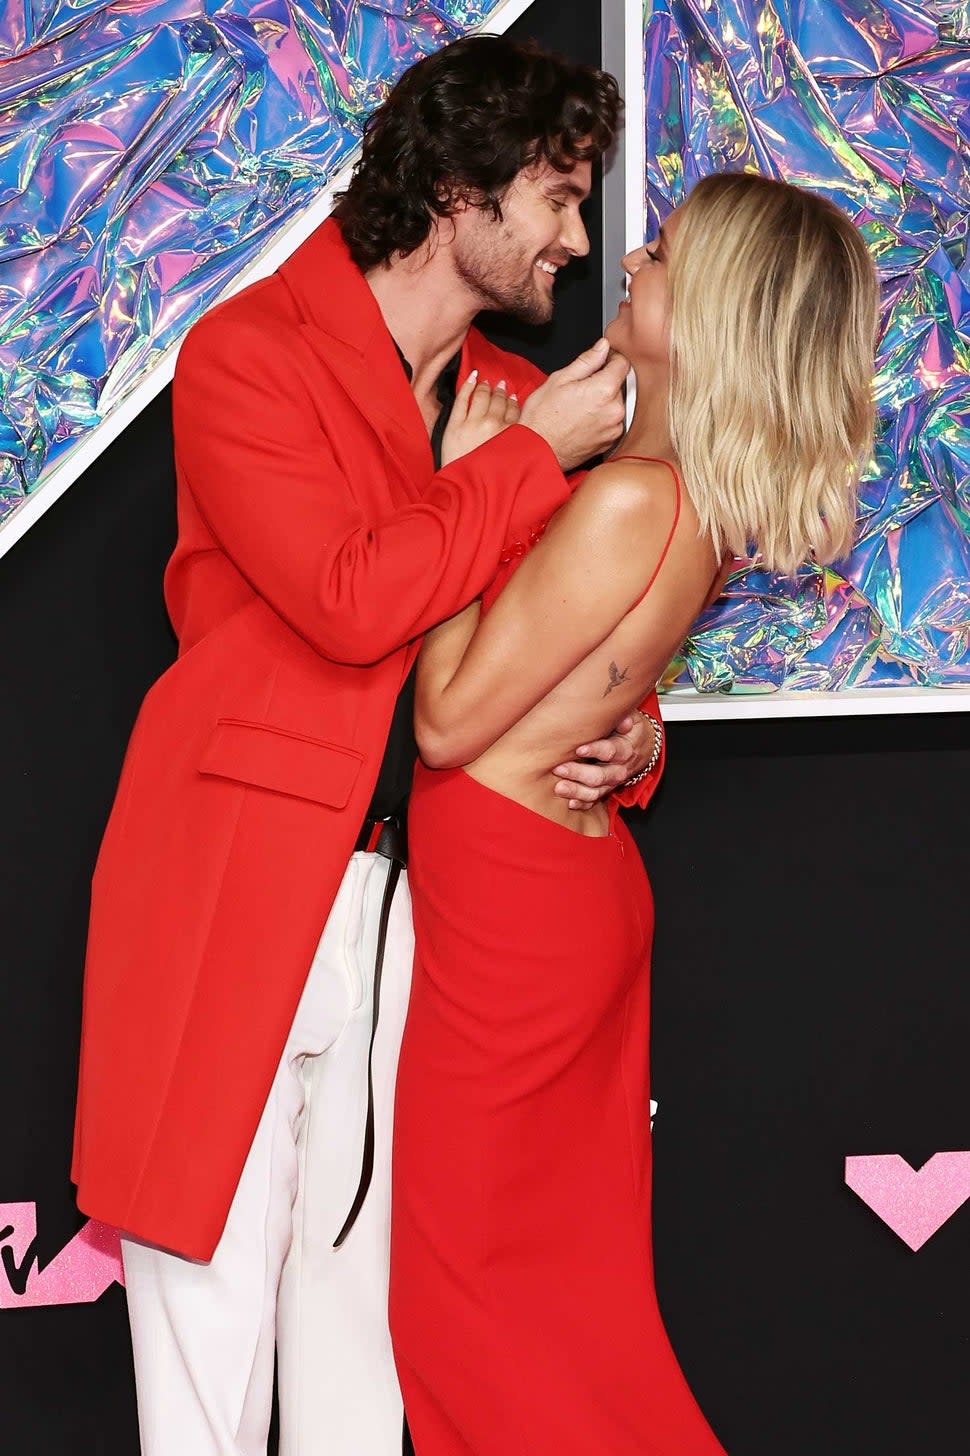 Chase Stokes and Kelsea Ballerini attend the 2023 MTV Video Music Awards at the Prudential Center on September 12, 2023 in Newark, New Jersey.